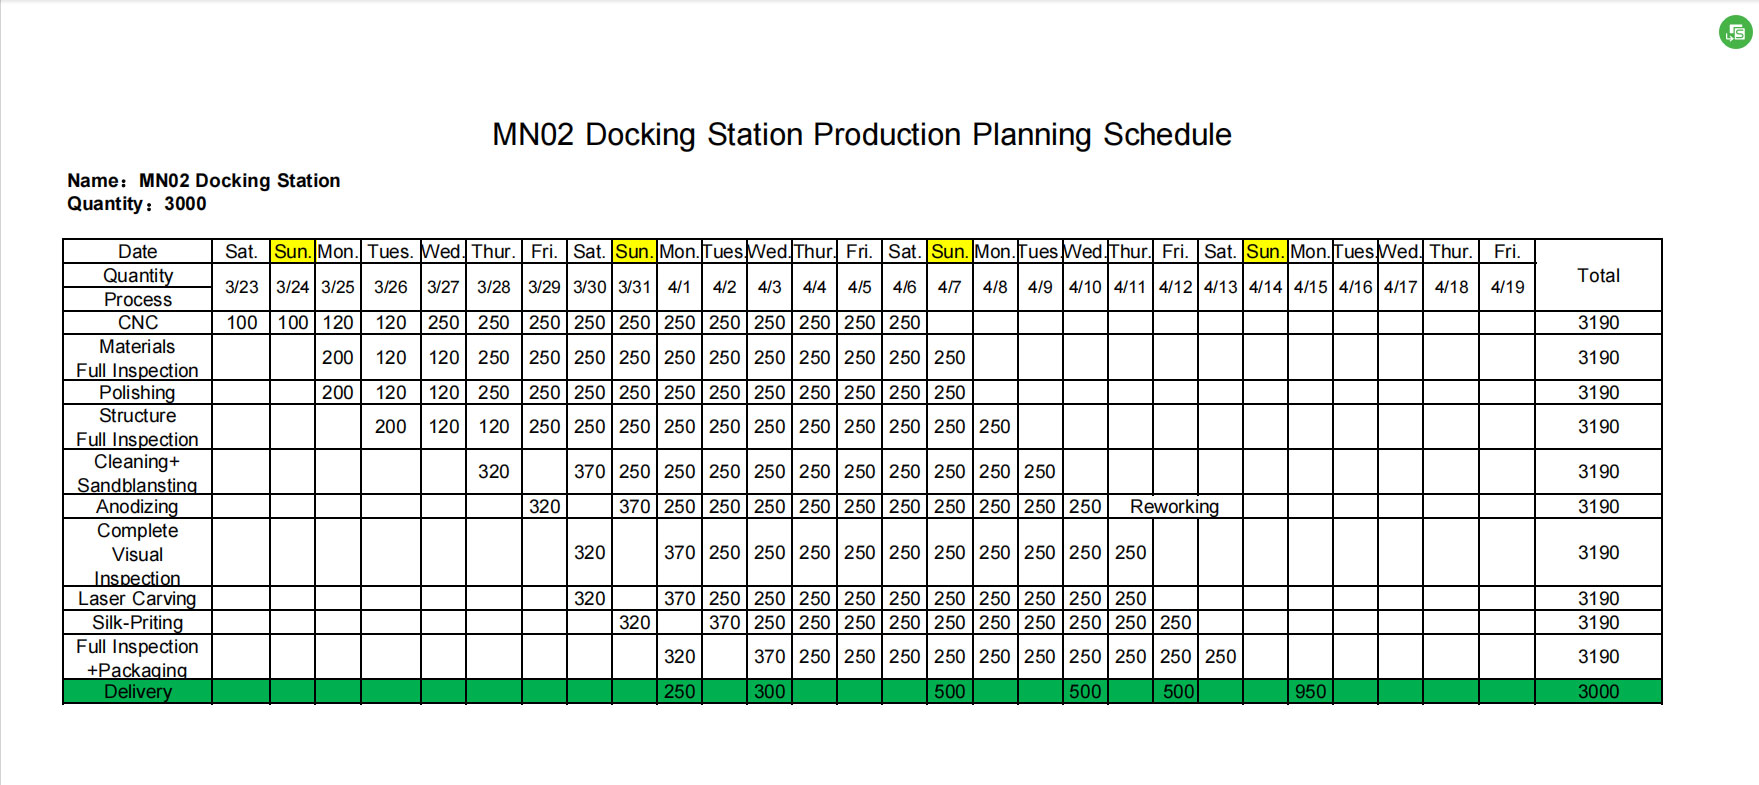 MN02 Docking Station Production Planning Schedule